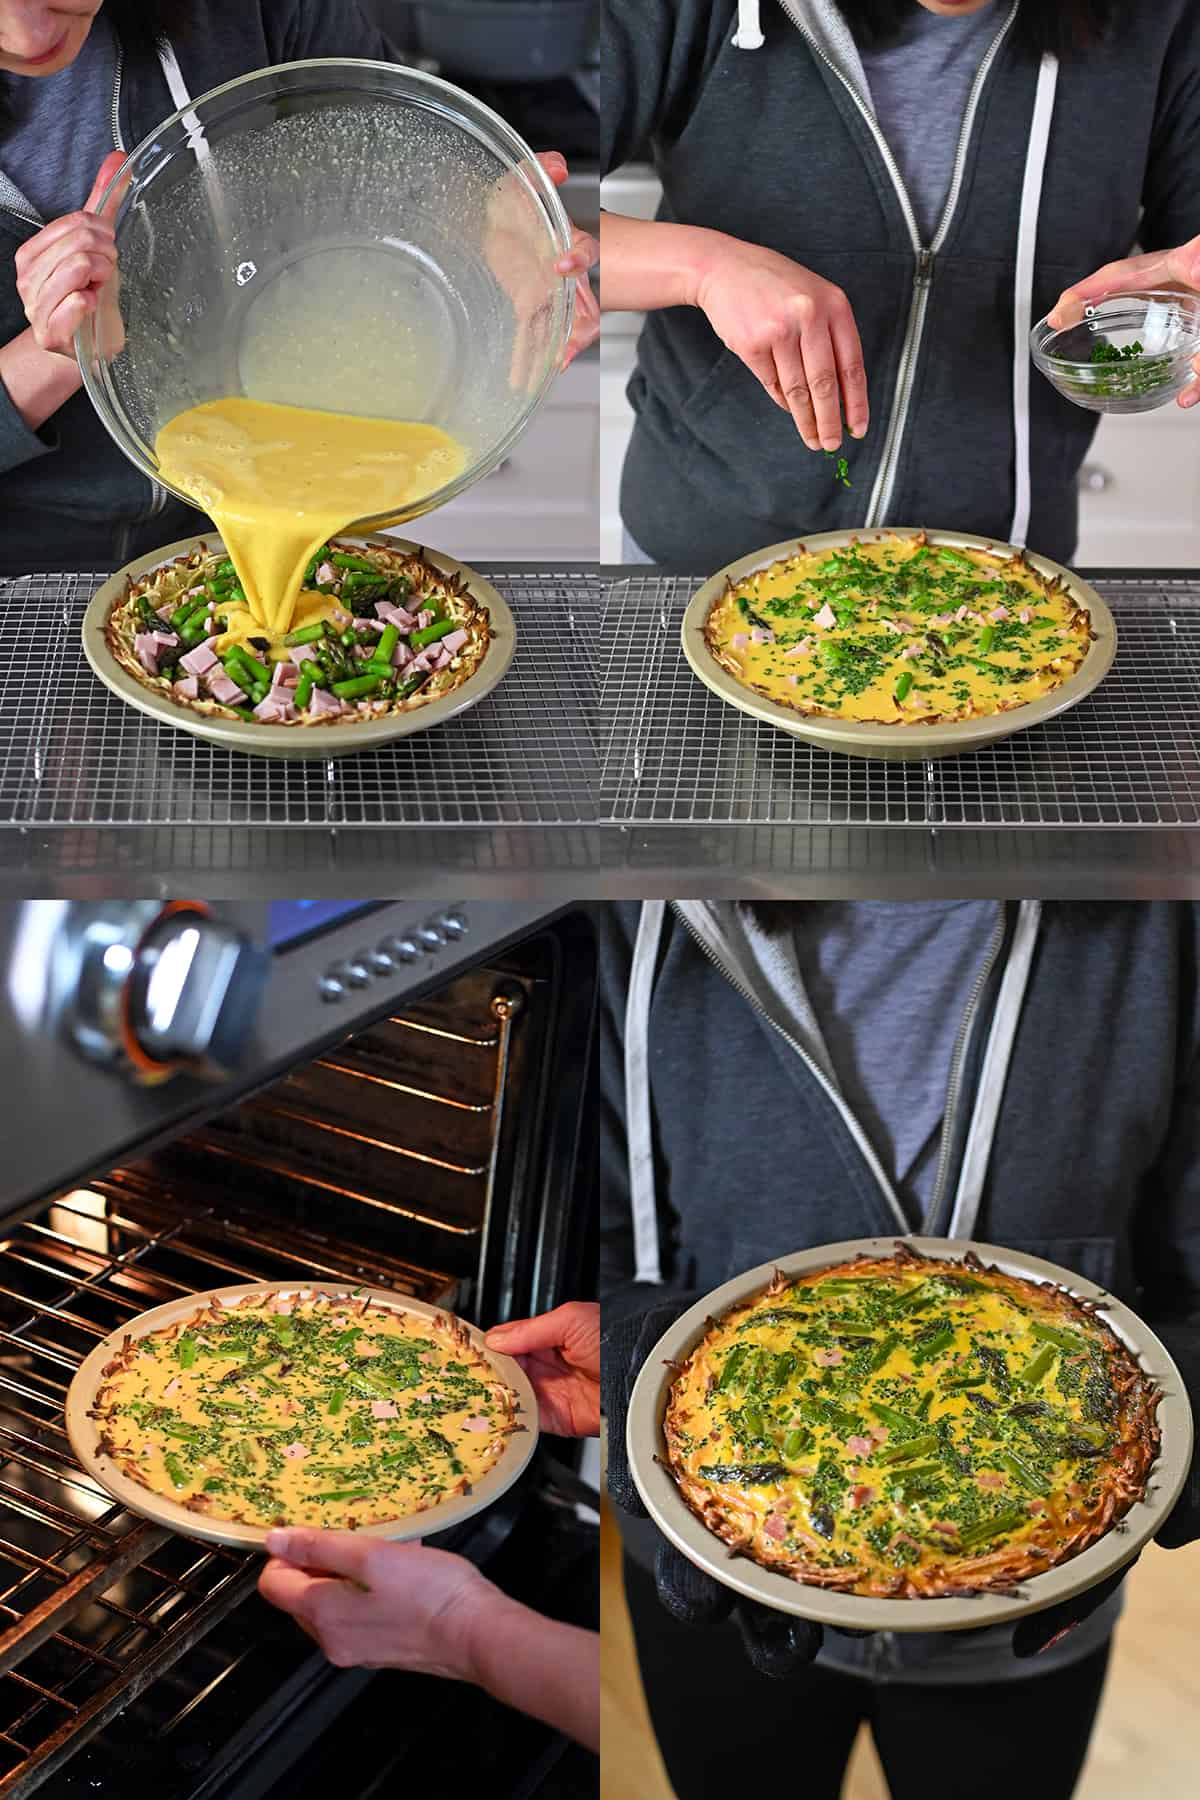 Assembling the paleo asparagus quiche and baking it in the oven.